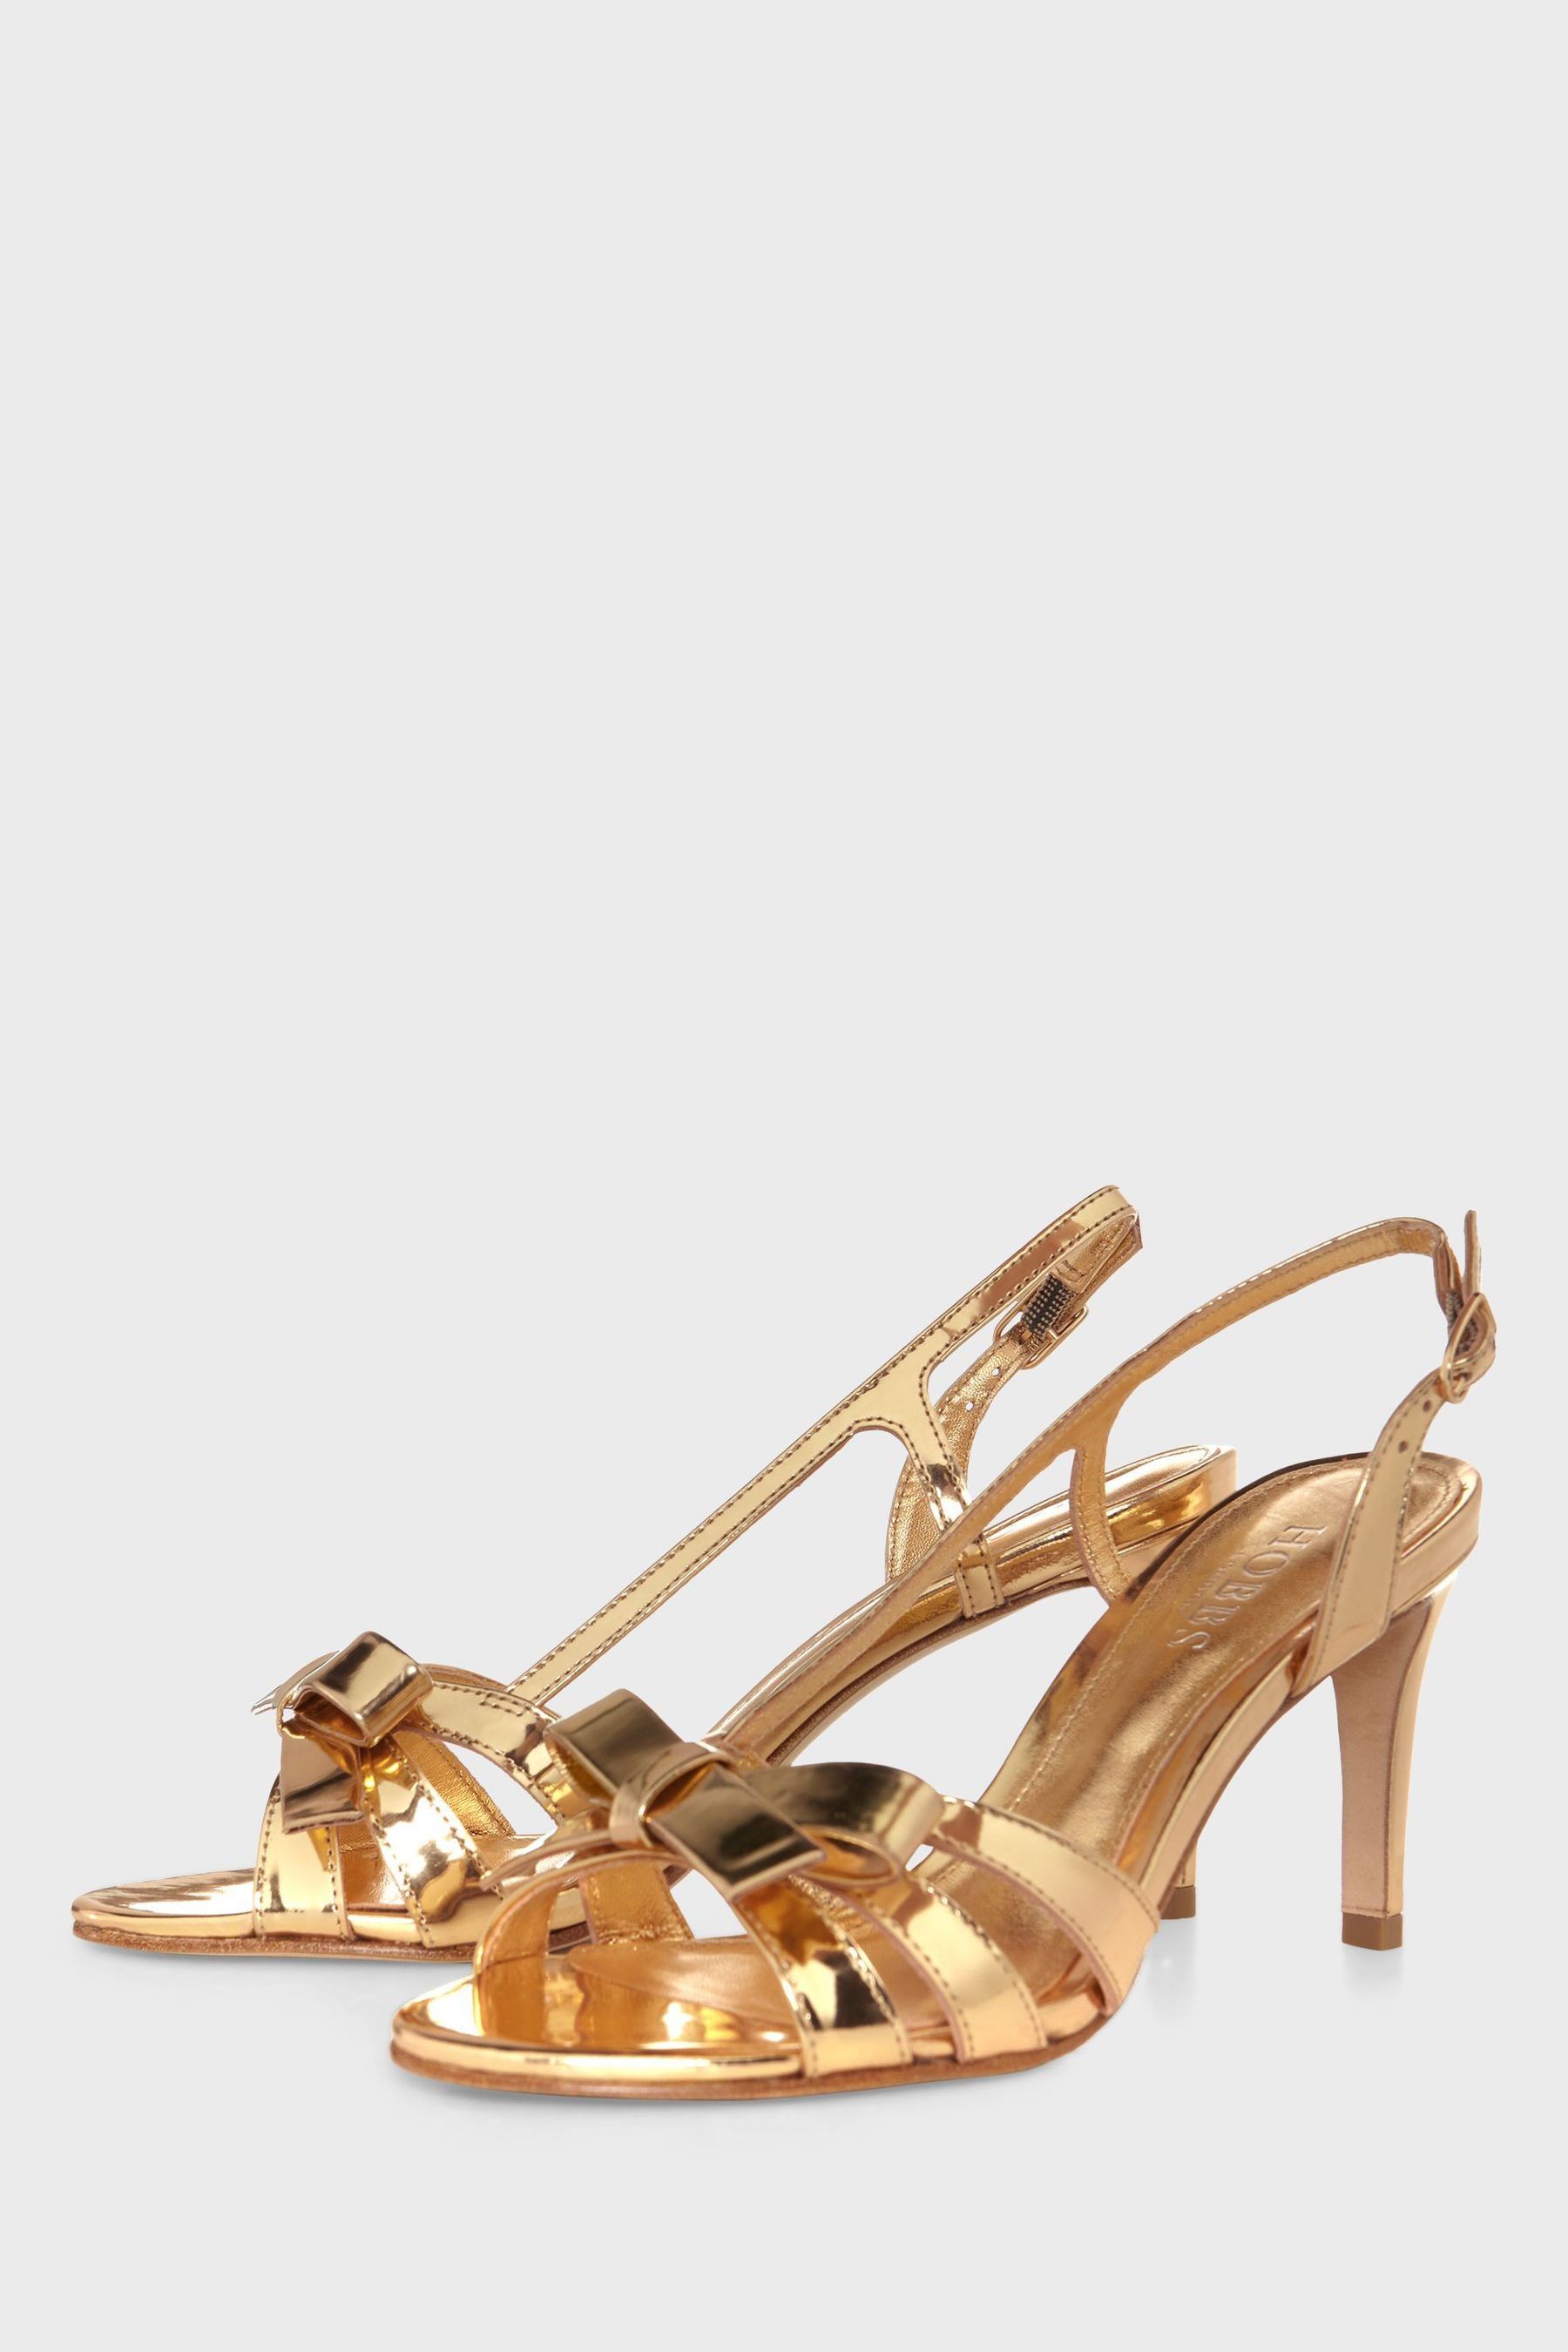 Buy Hobbs Gold Anastasia Bow Sandals from the Next UK online shop